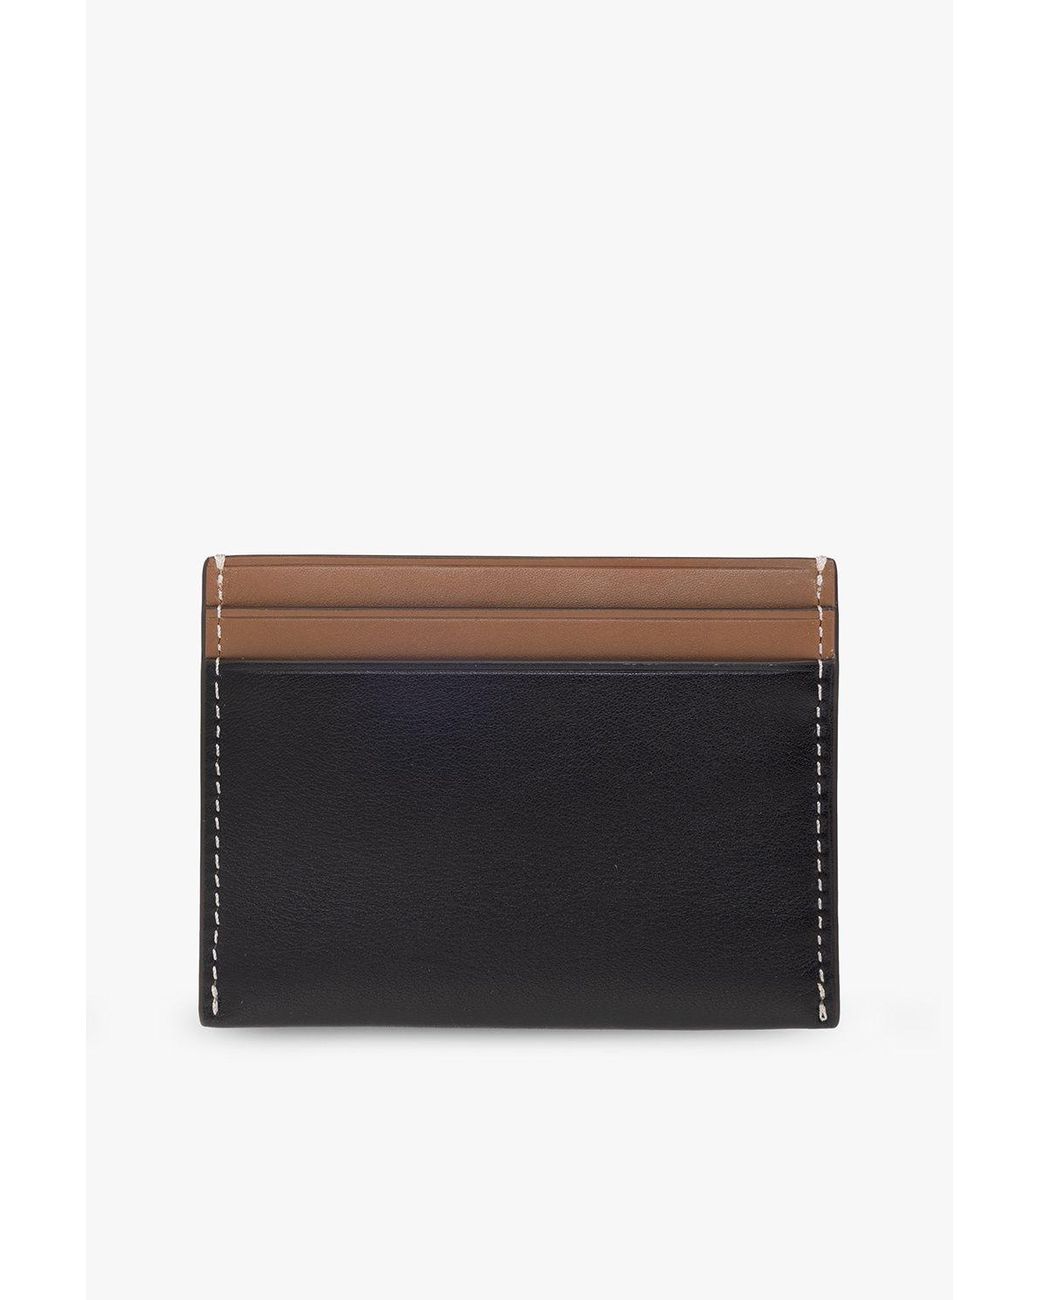 Tory Burch Leather Card Holder in Black | Lyst